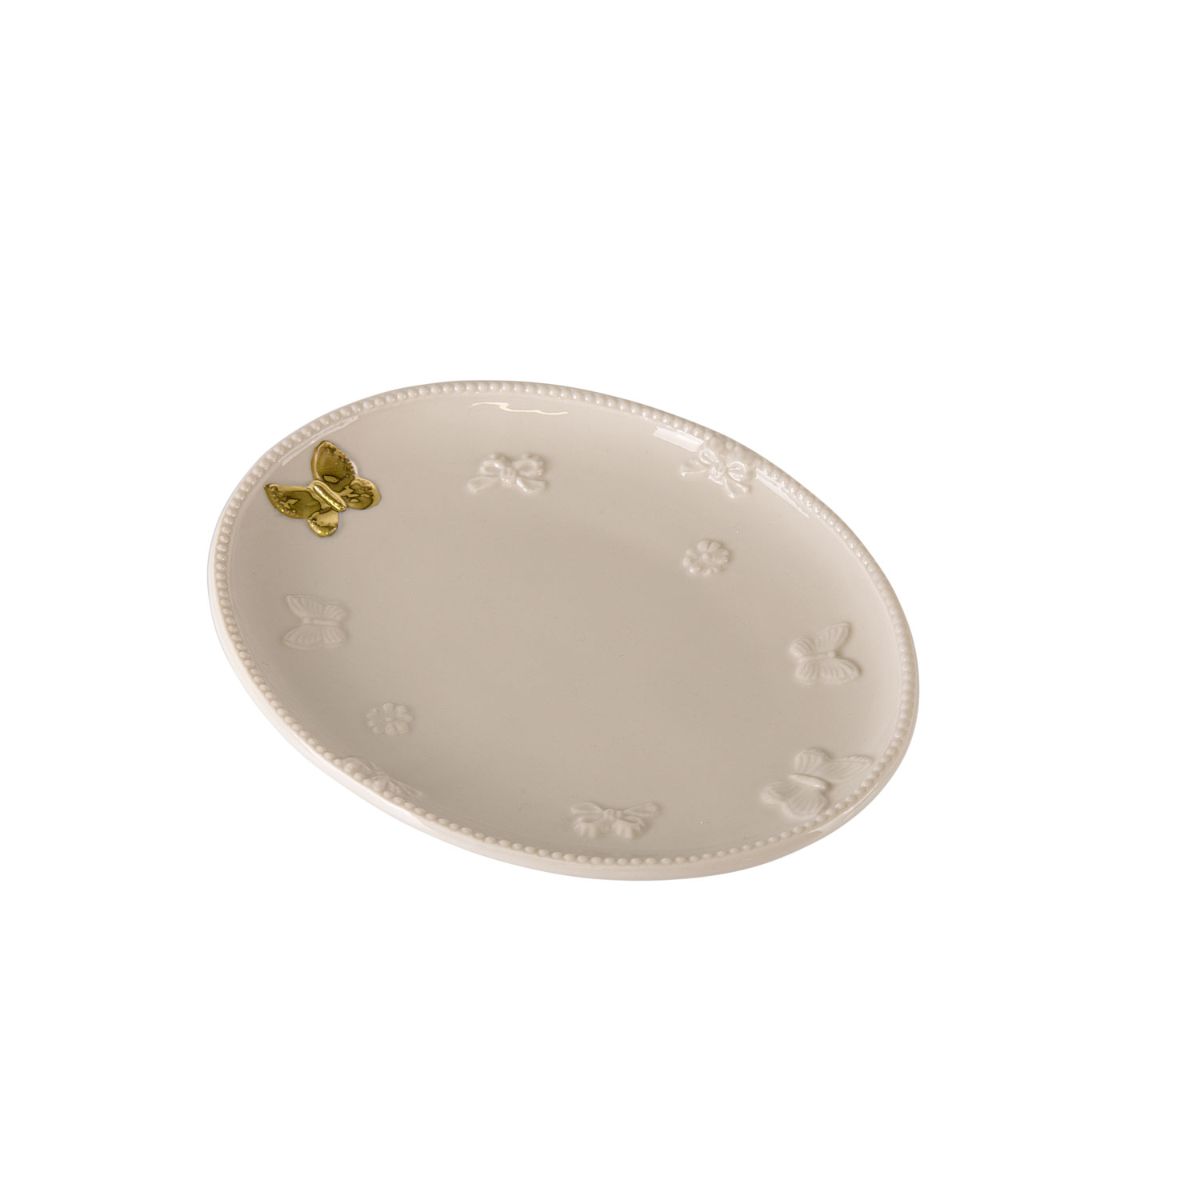 Butterfly Trinket Dish - White & Gold